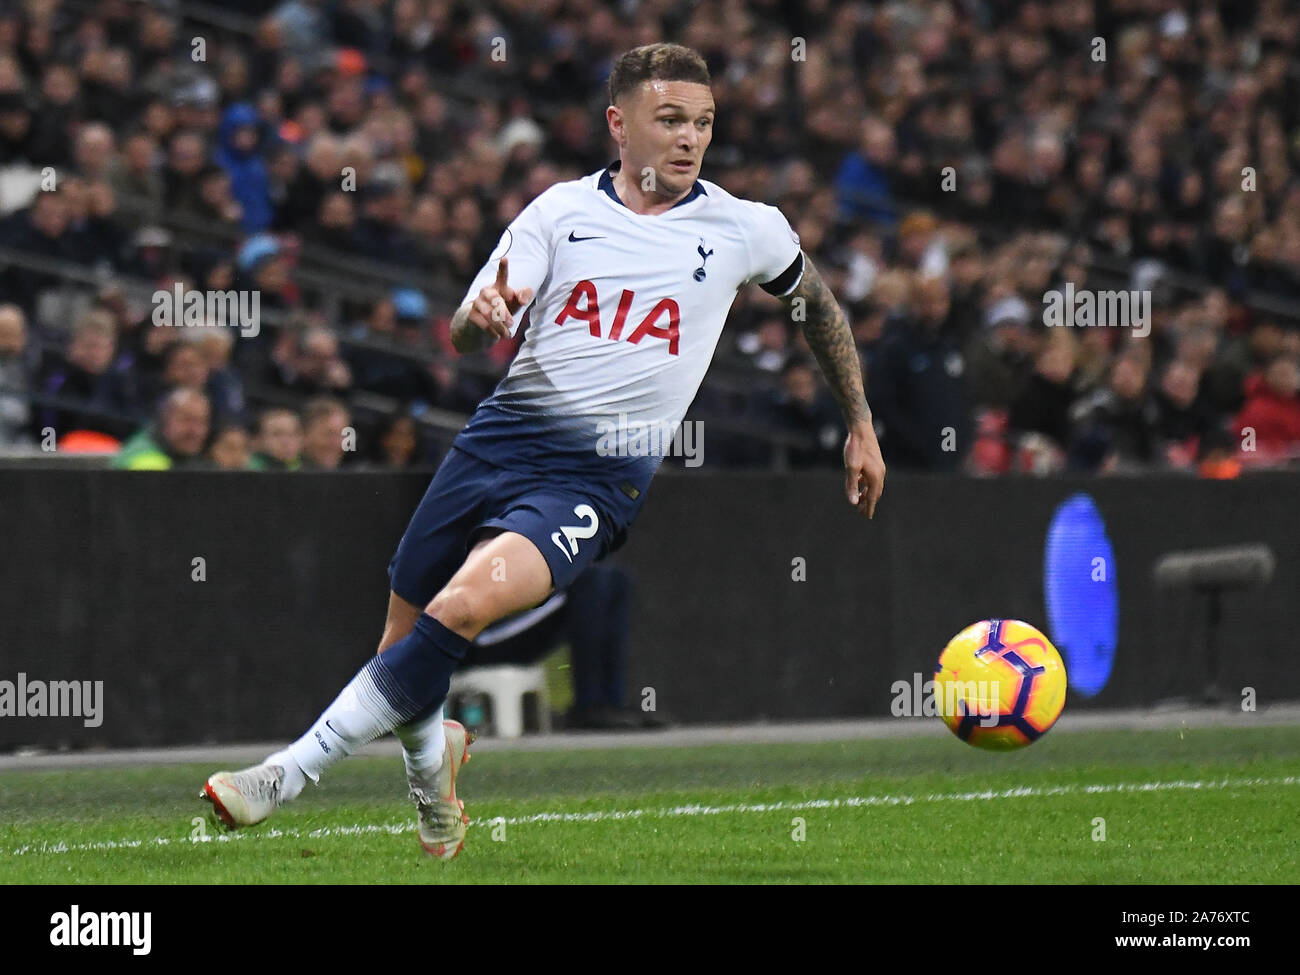 LONDON, ENGLAND - OCTOBER 29, 2018: Kieran Trippier of Tottenham pictured during the 2018/19 English Premier League game between Tottenham Hotspur and Manchester City at Wembley Stadium. Stock Photo